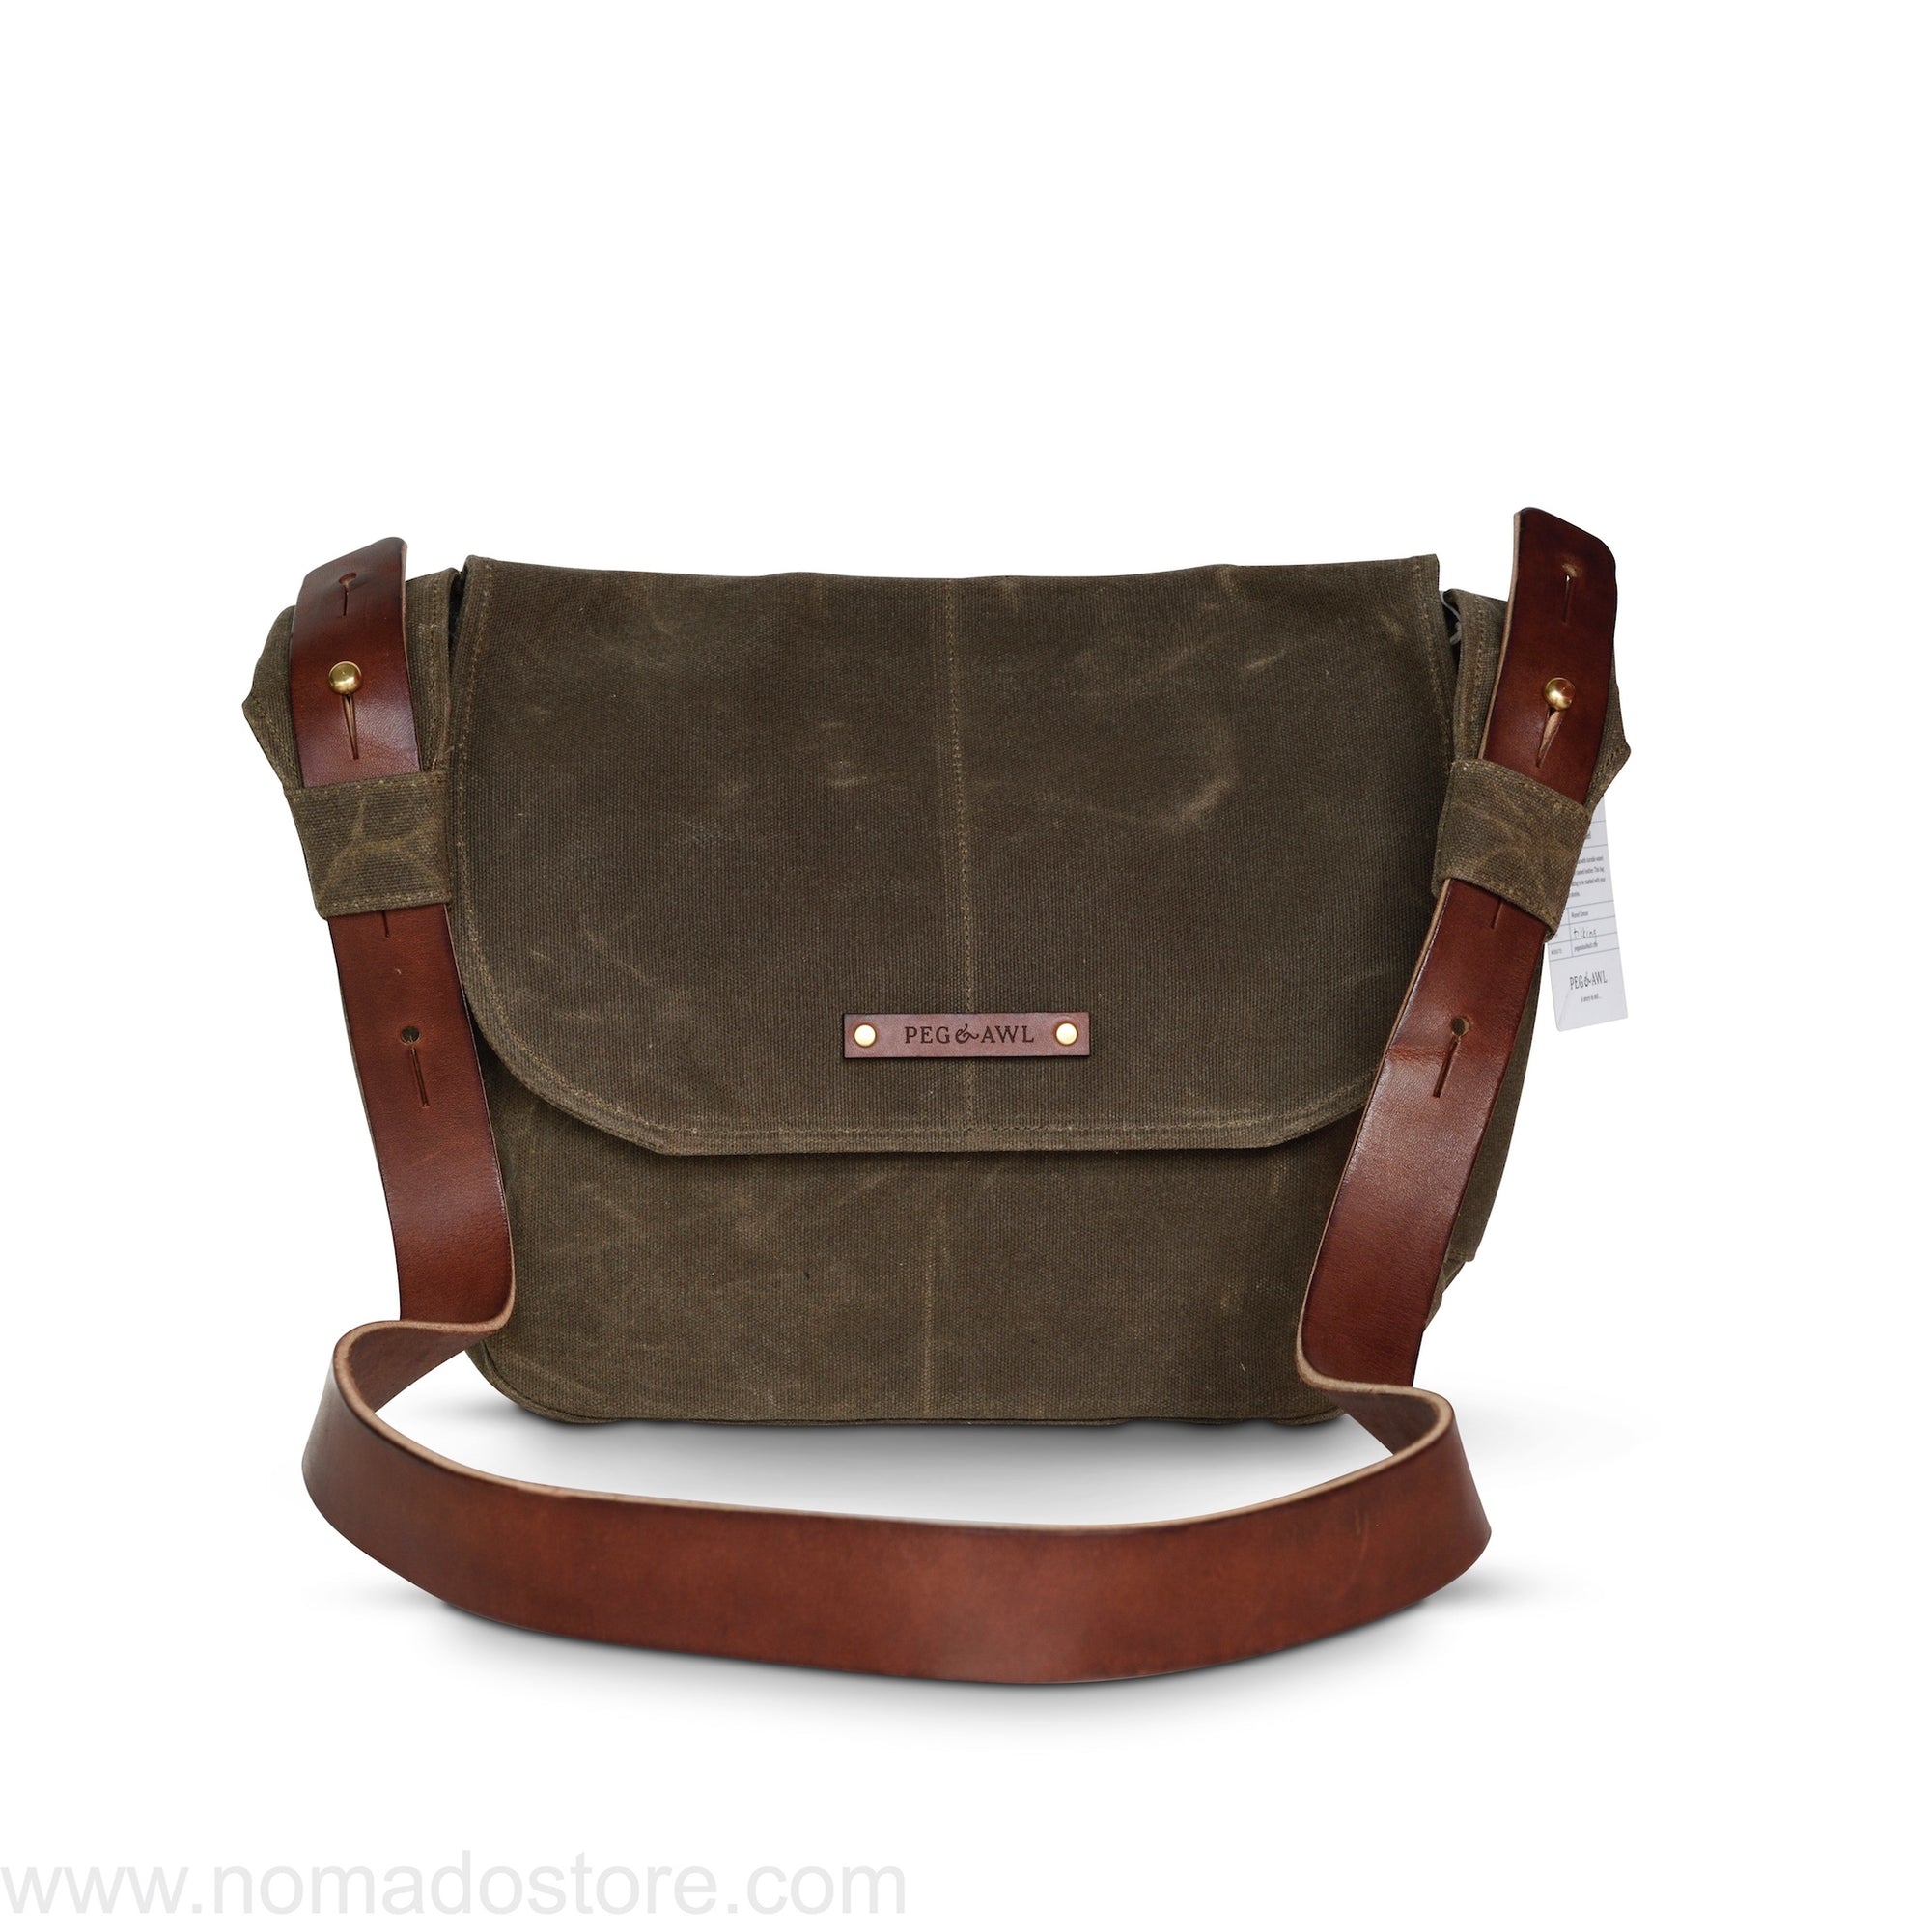 Peg and Awl The Finch Satchel - Truffle - NOMADO Store 